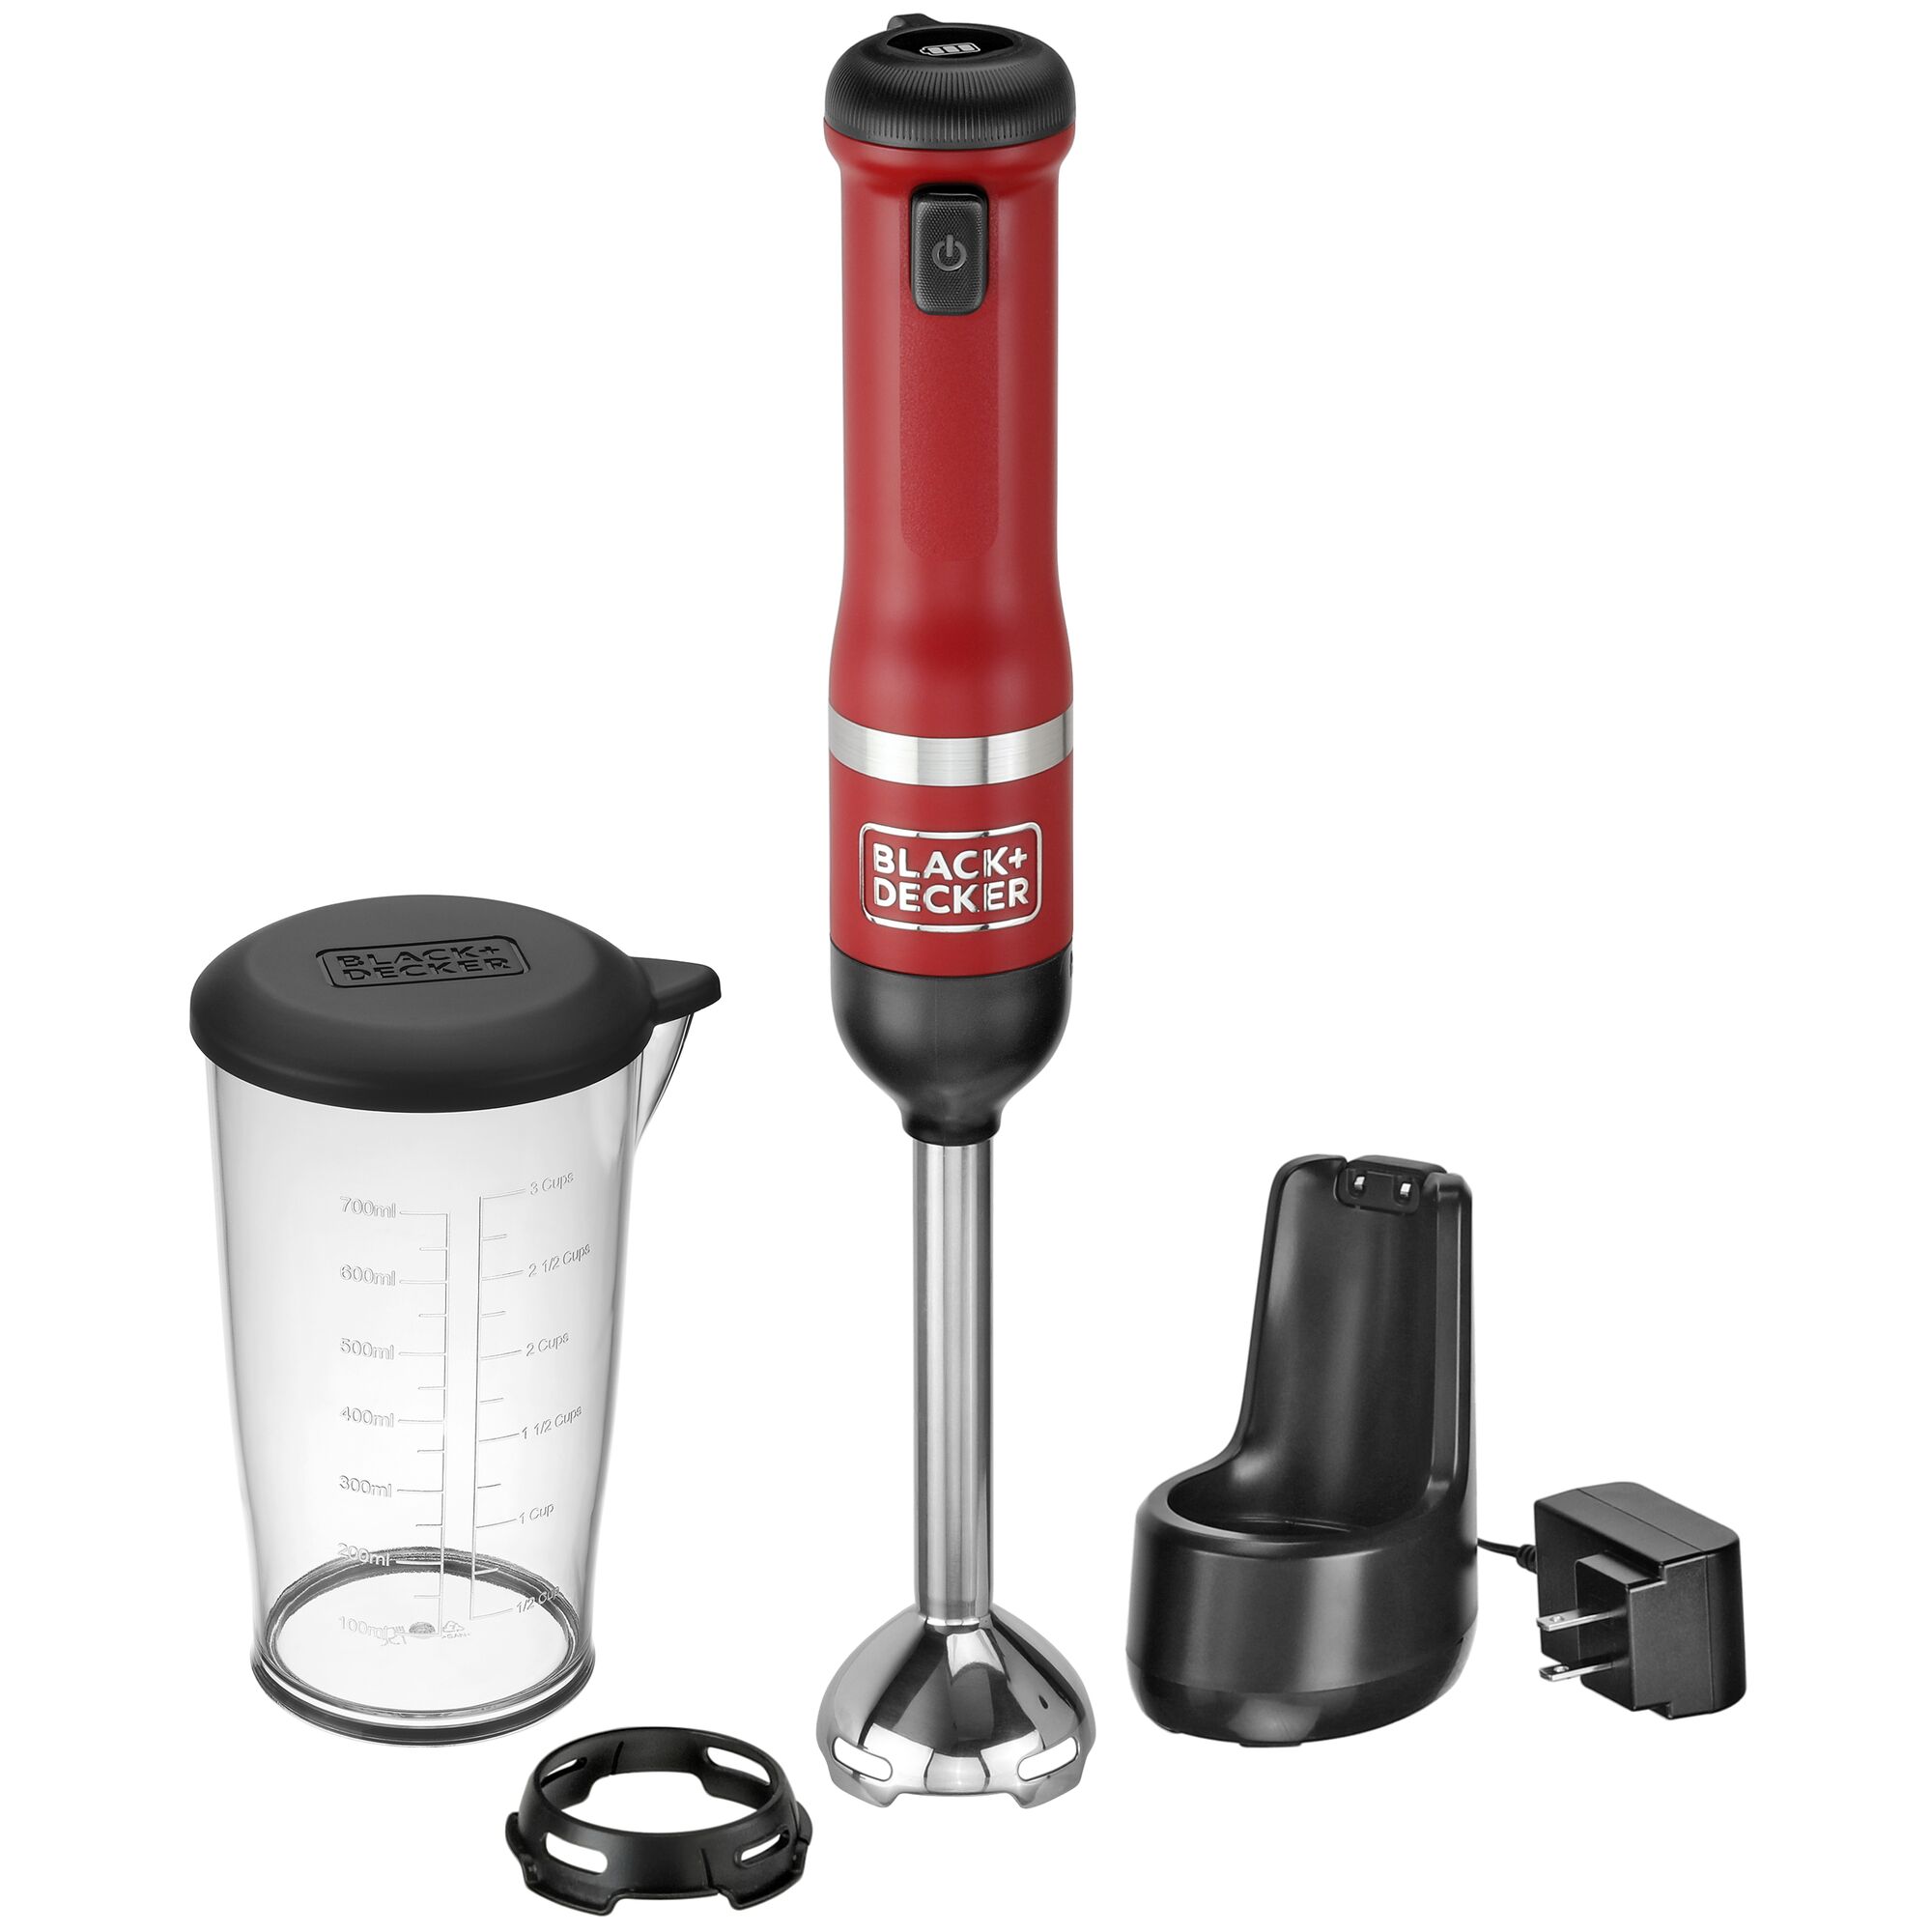 Front view of BLACK+DECKER kitchen wand Cordless Immersion Blender kit in red